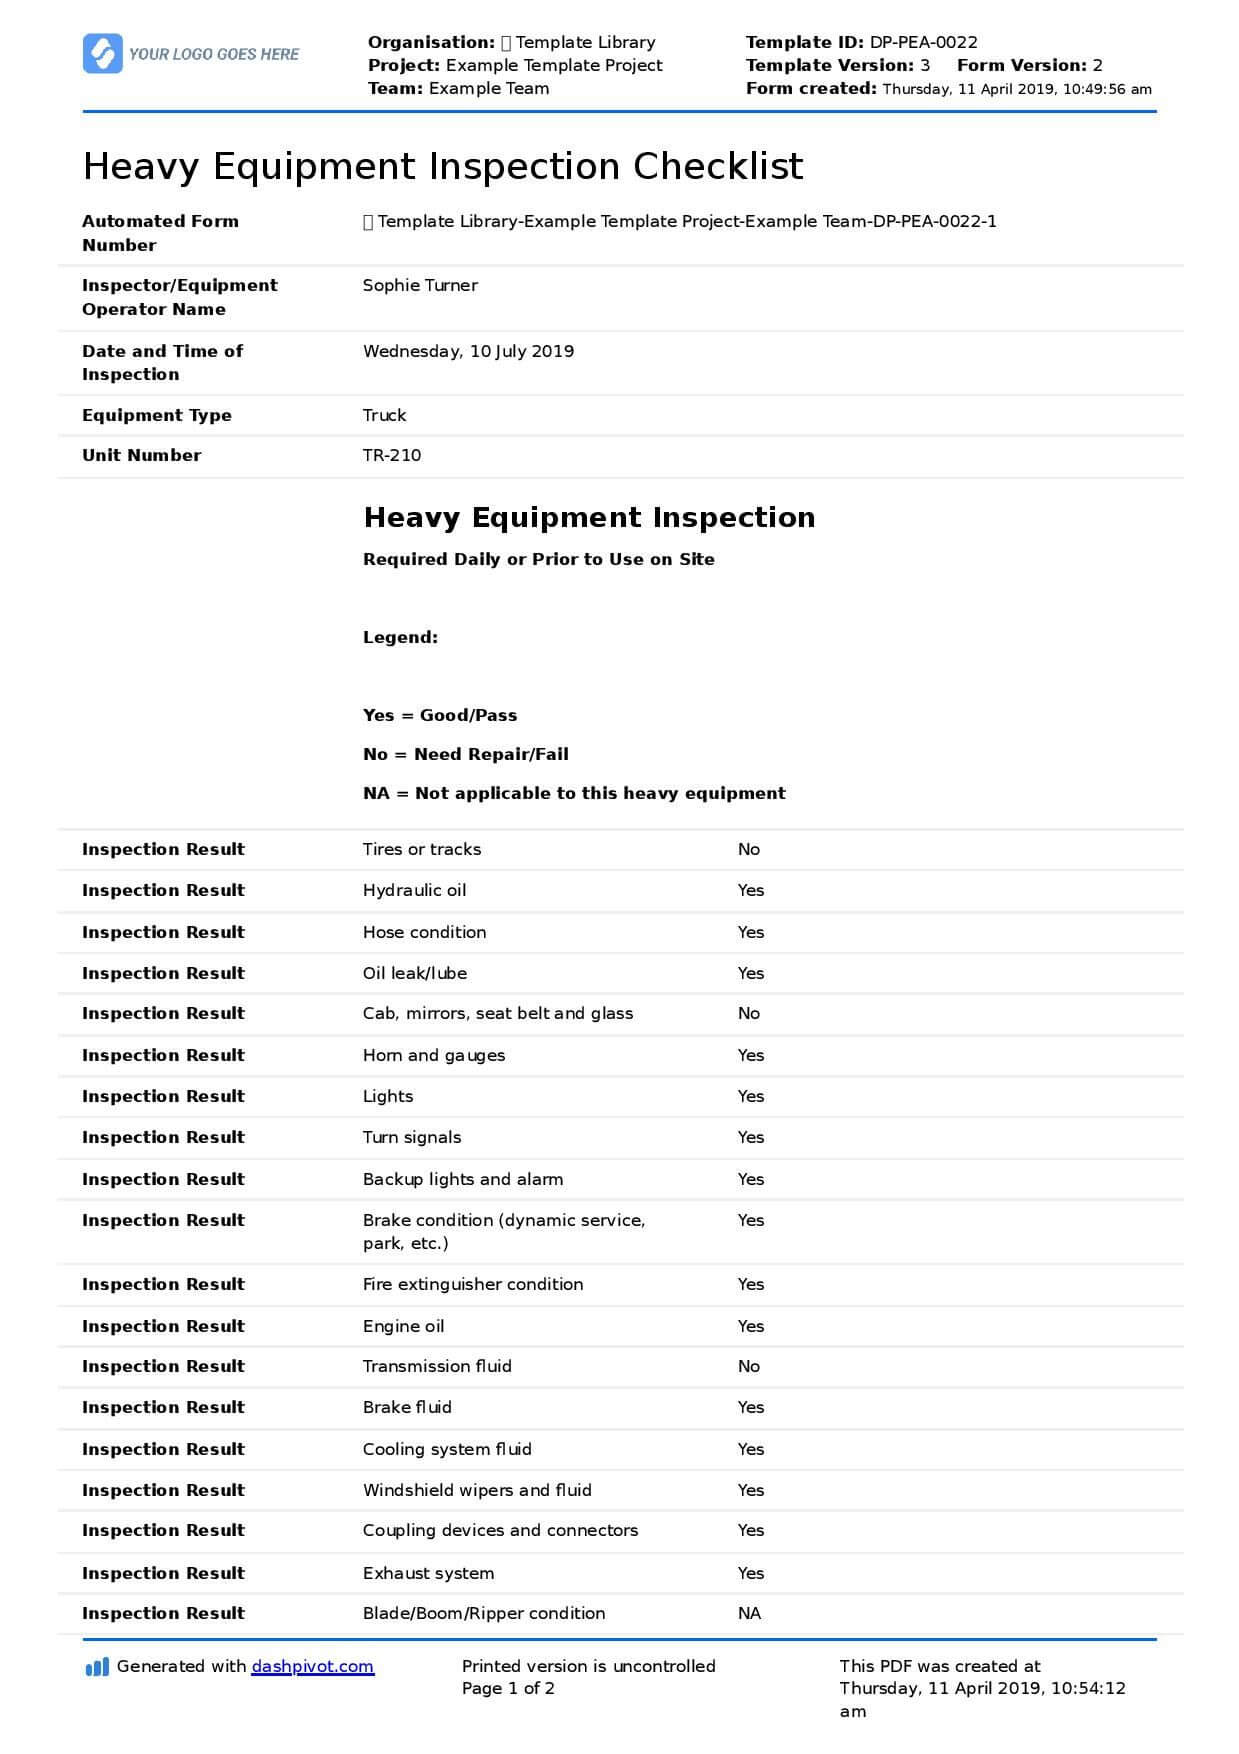 Heavy Equipment Inspection Checklist Templates (Free Throughout Certificate Of Inspection Template